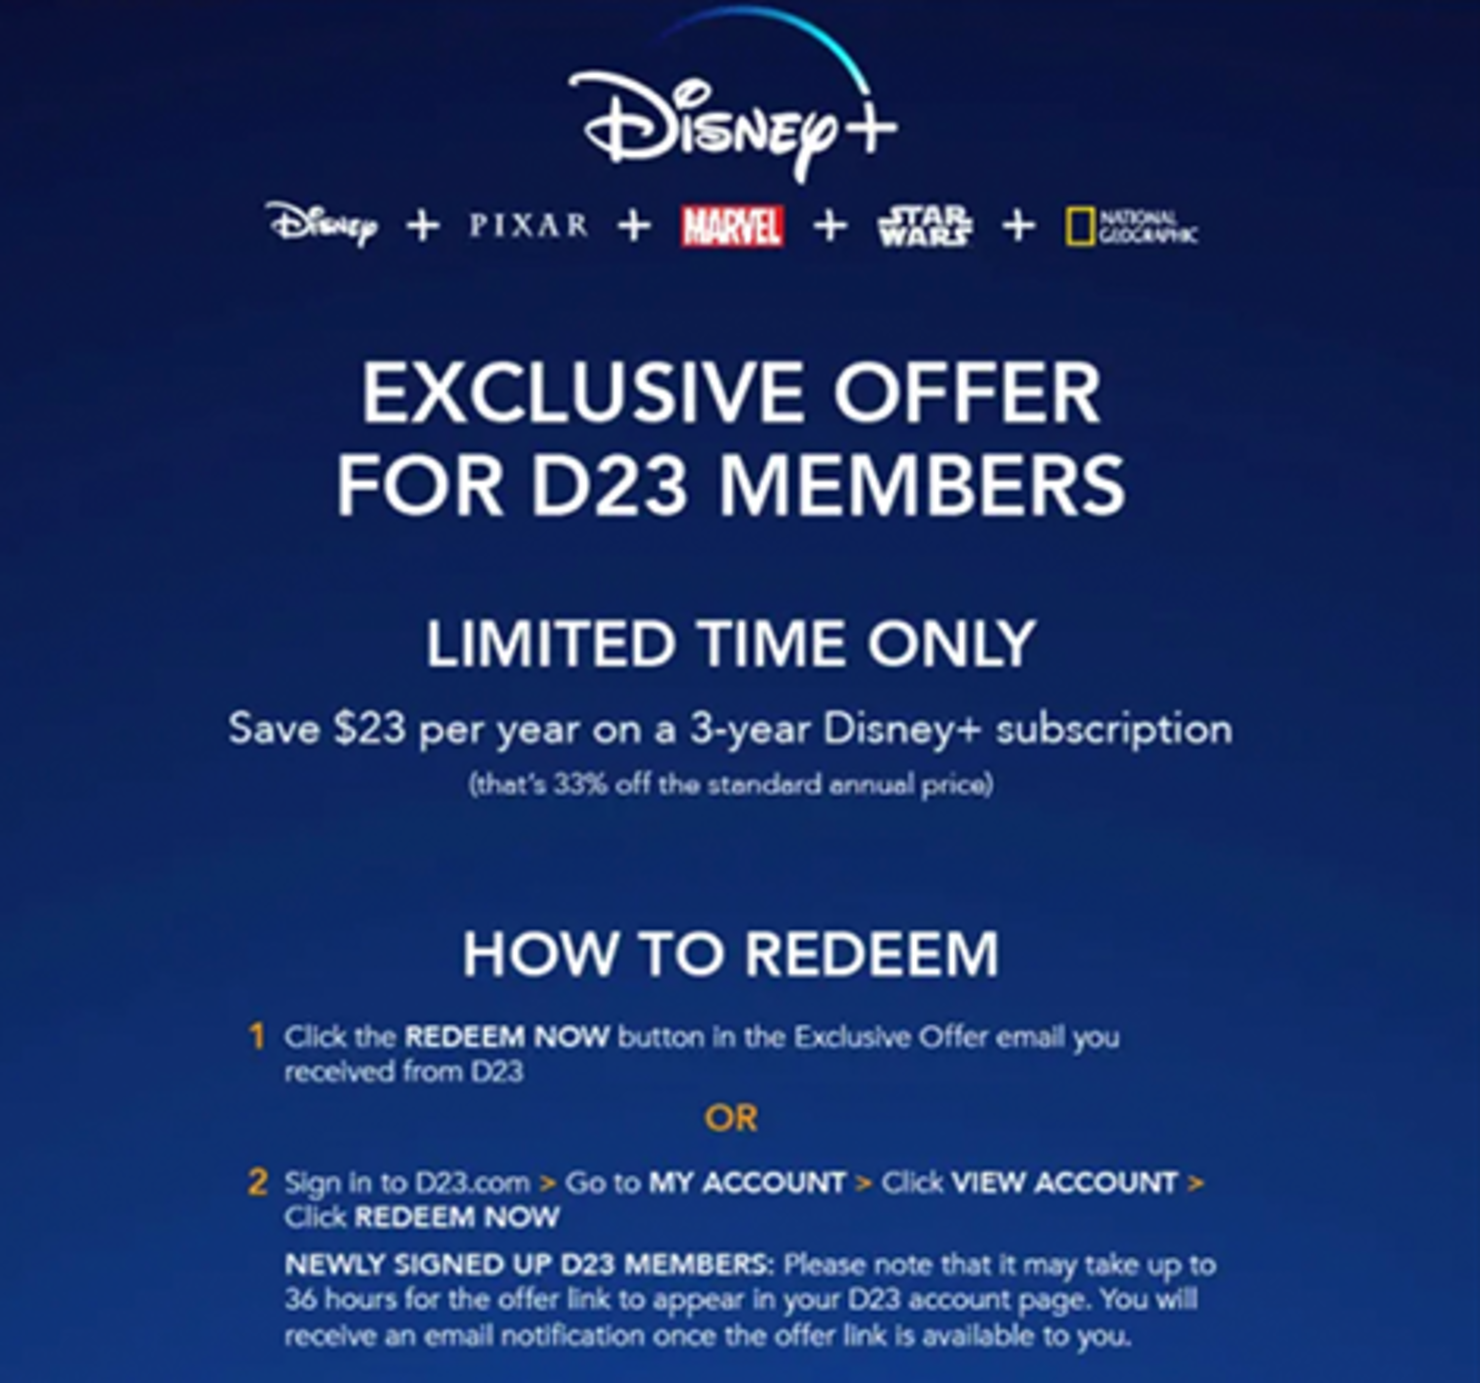 How to Get the Most Out of Your Disney Plus Subscription